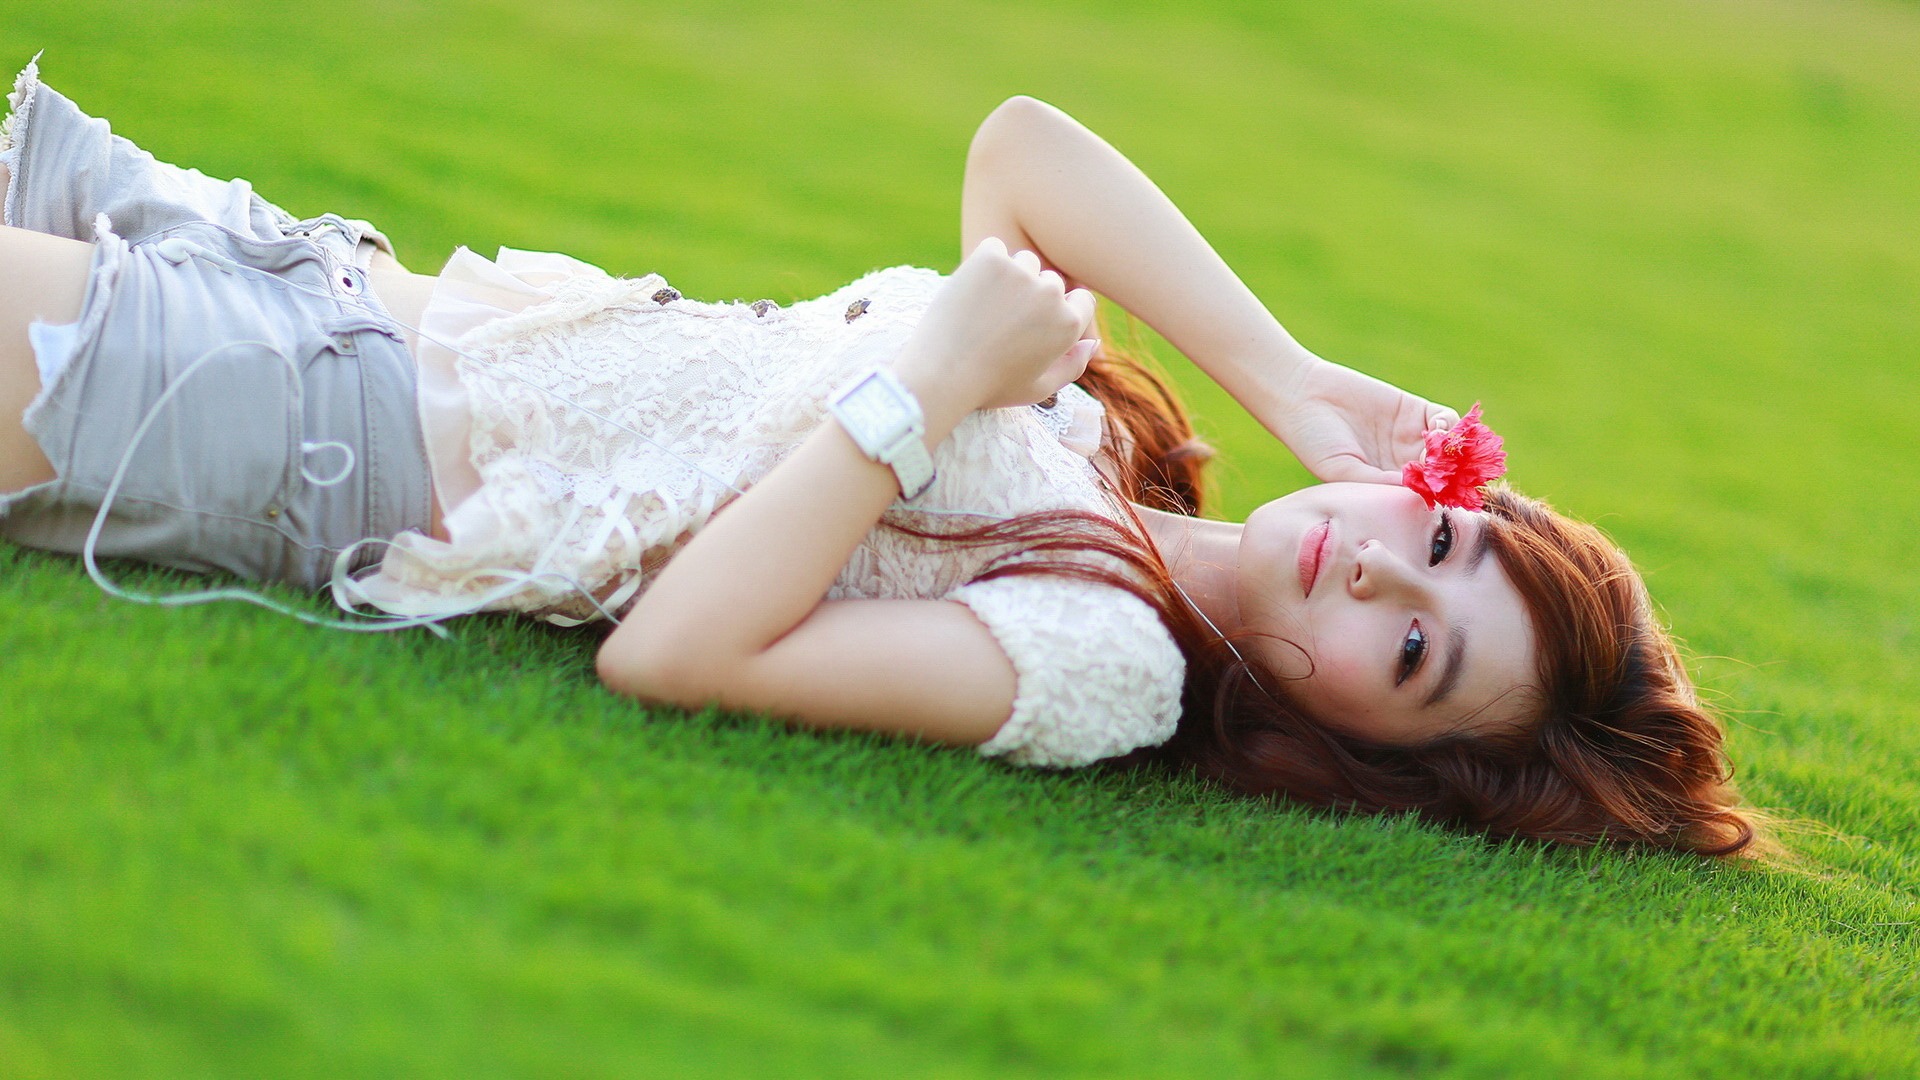 Pure and lovely young Asian girl HD wallpapers collection (2) #29 - 1920x1080